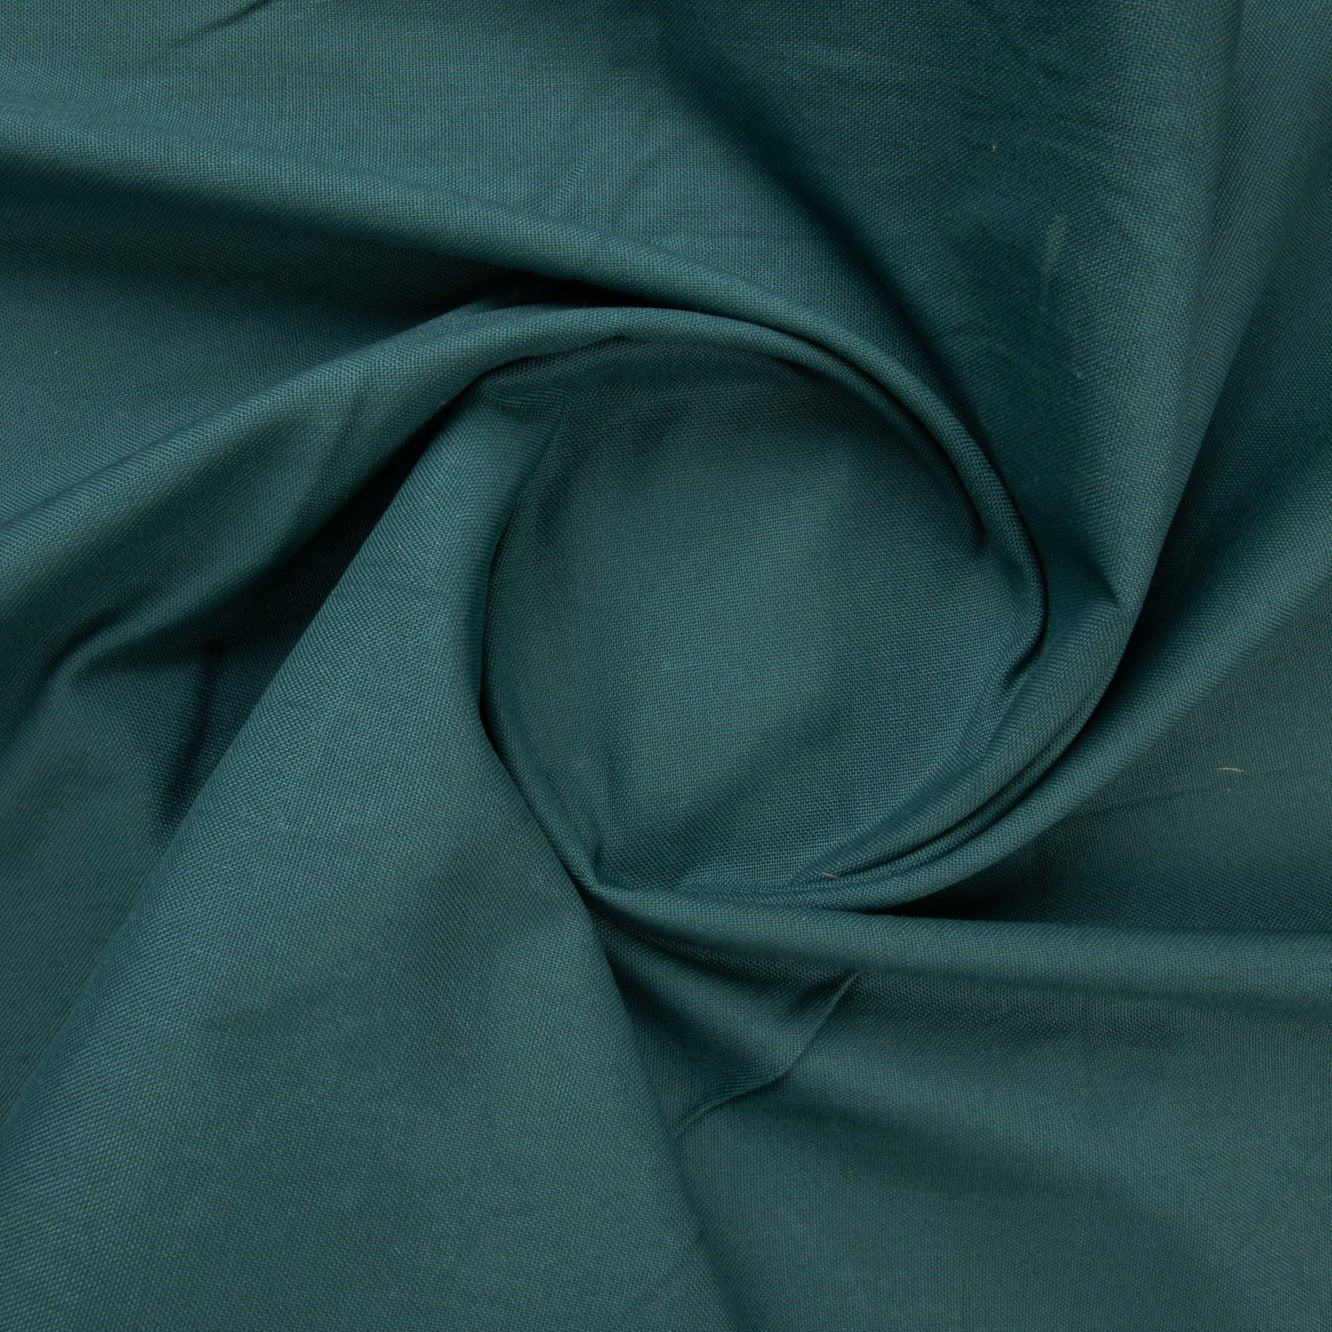 Teal Solid Casement Fabric Trade UNO